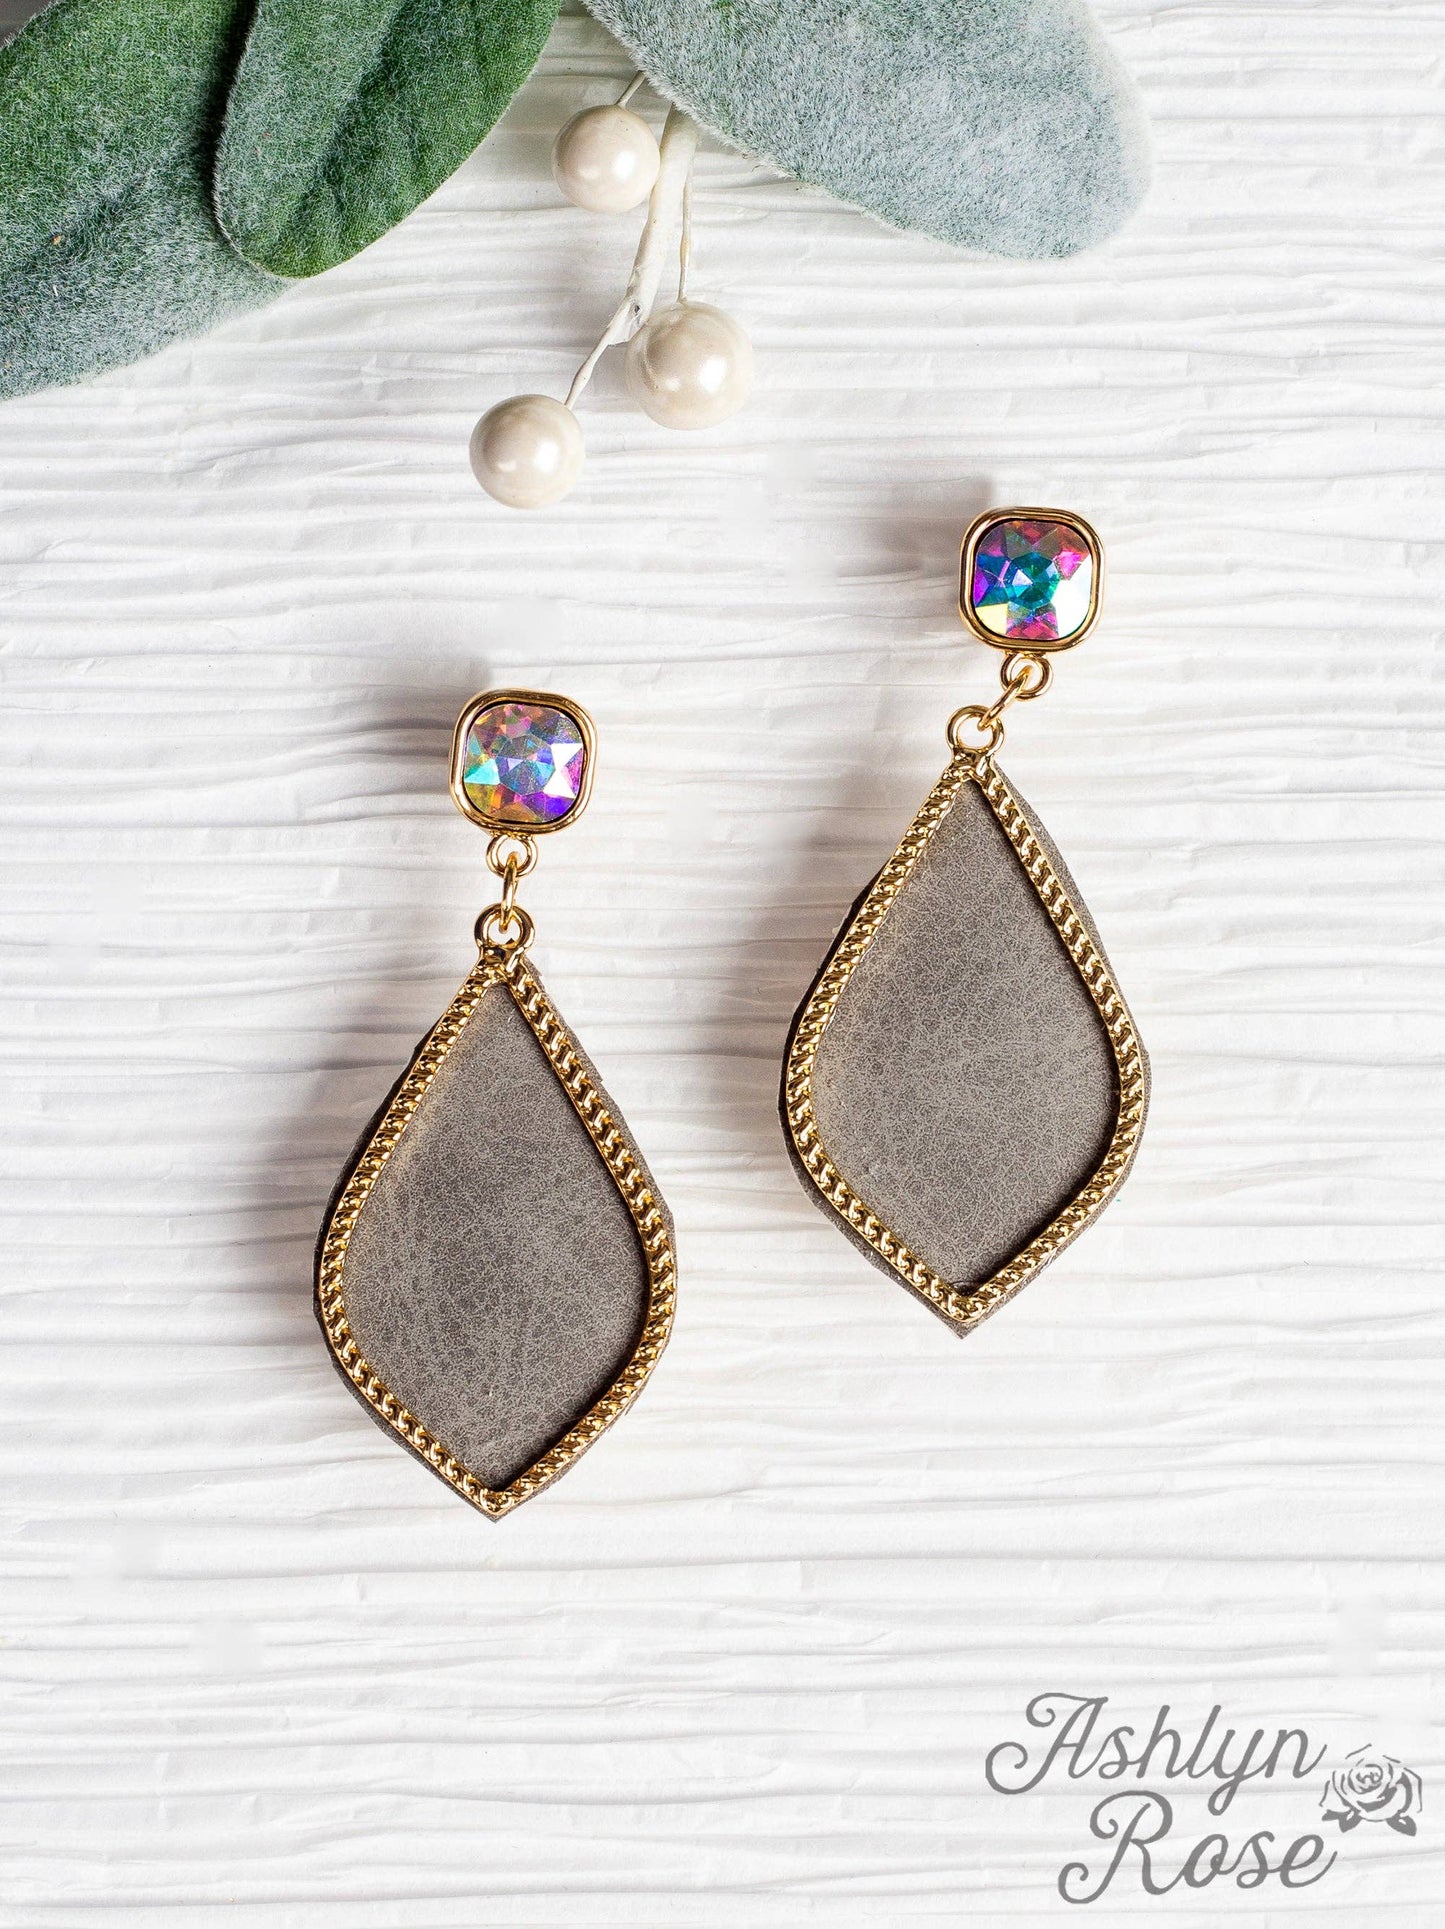 Too Strong to be Dainty Teardrop Earrings with Gold Casing, Grey